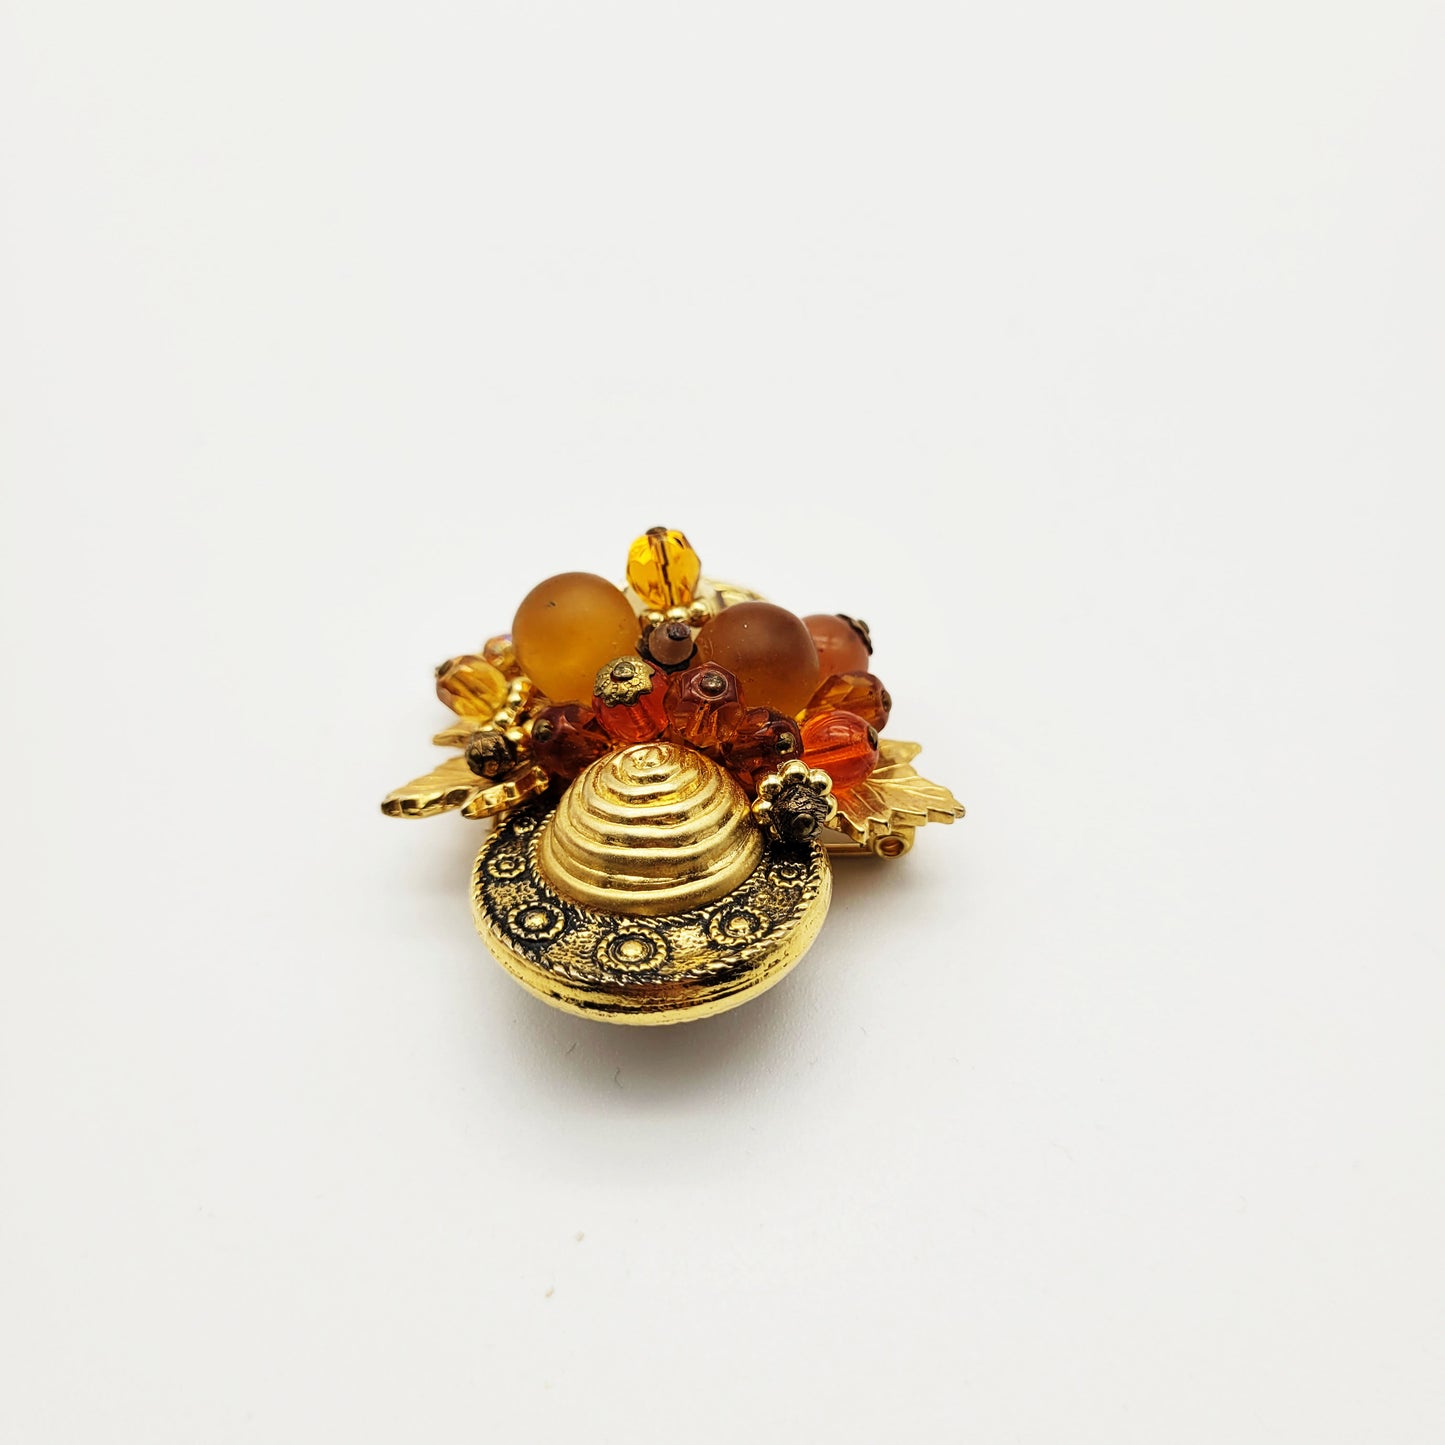 Vintage French brooch